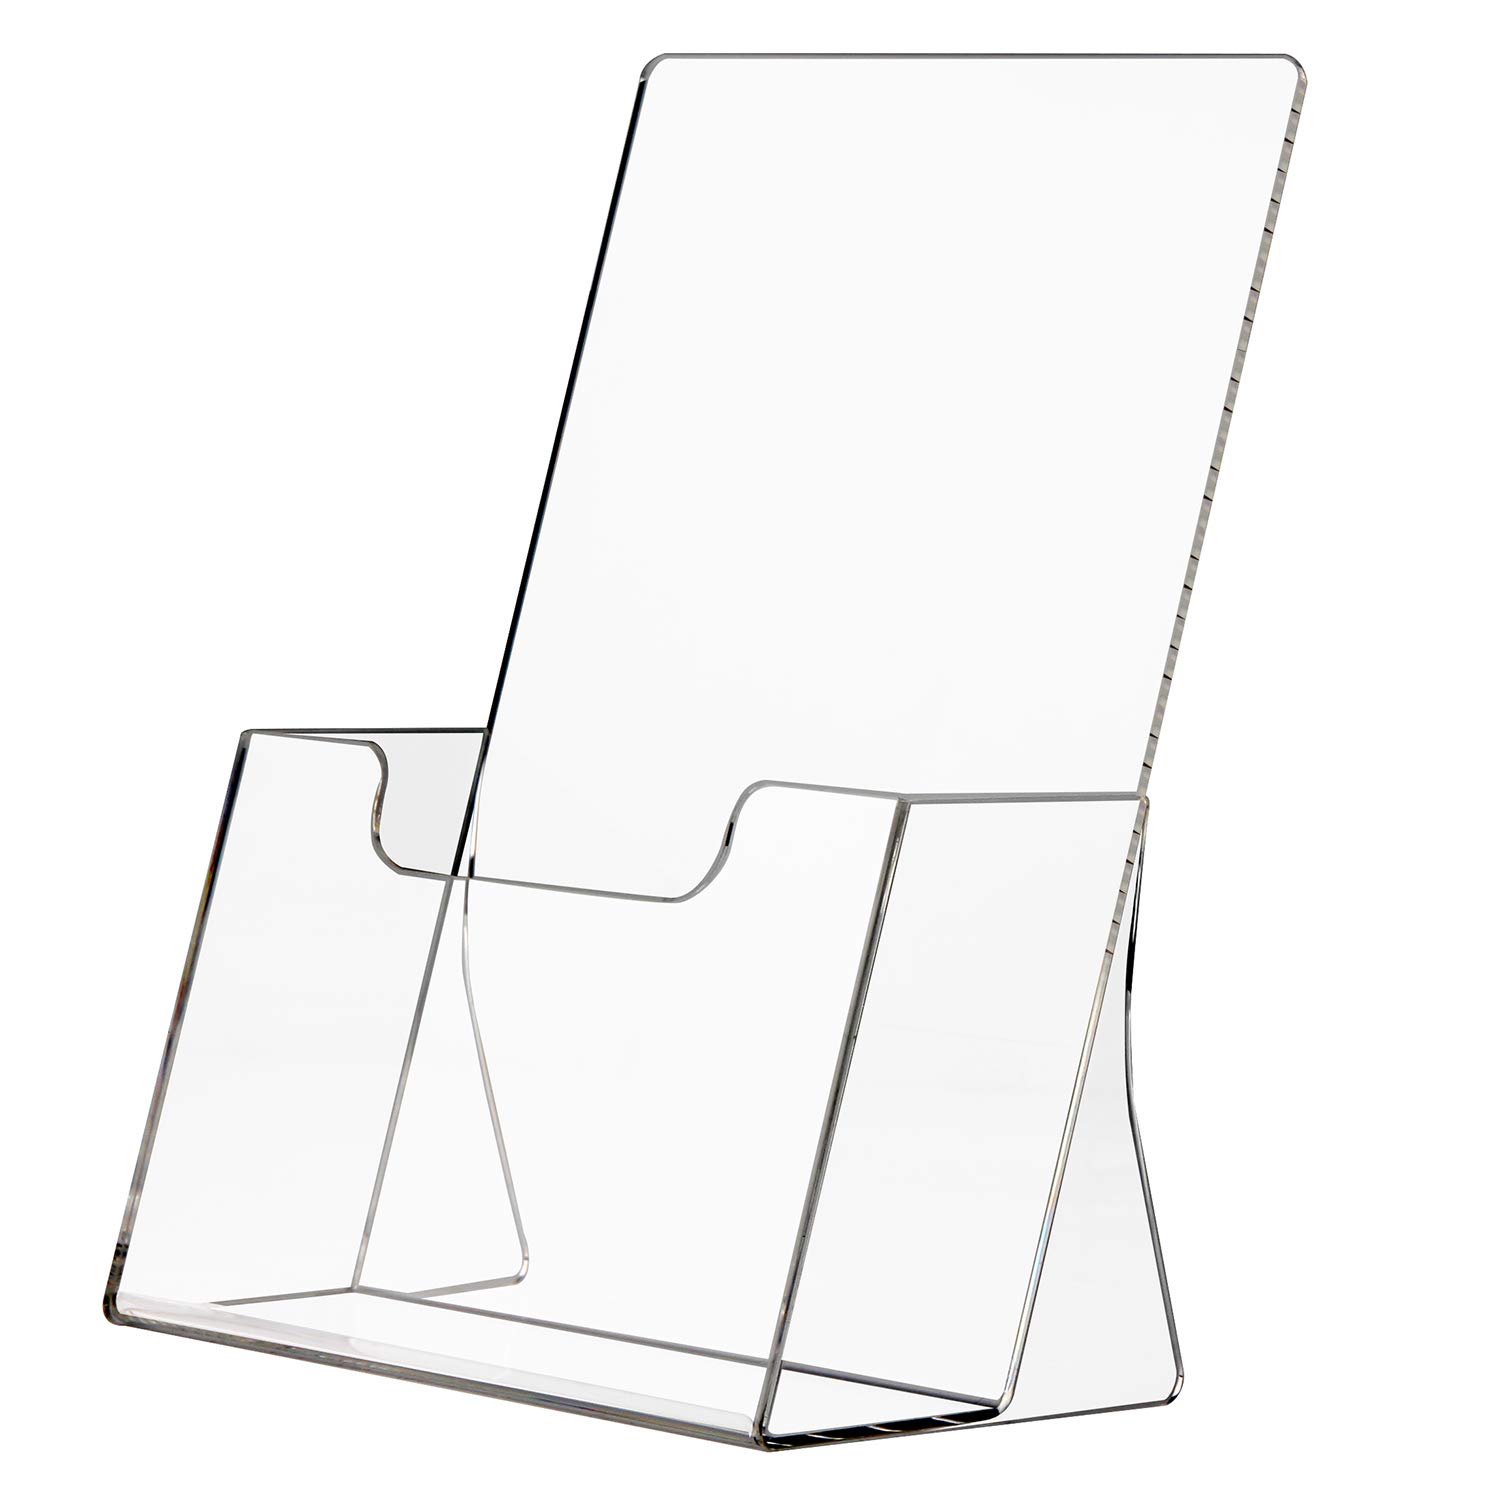 Clear Acrylic Brochure Wall Mount Sign Holder poster Sign Pocket with Business Card Holder